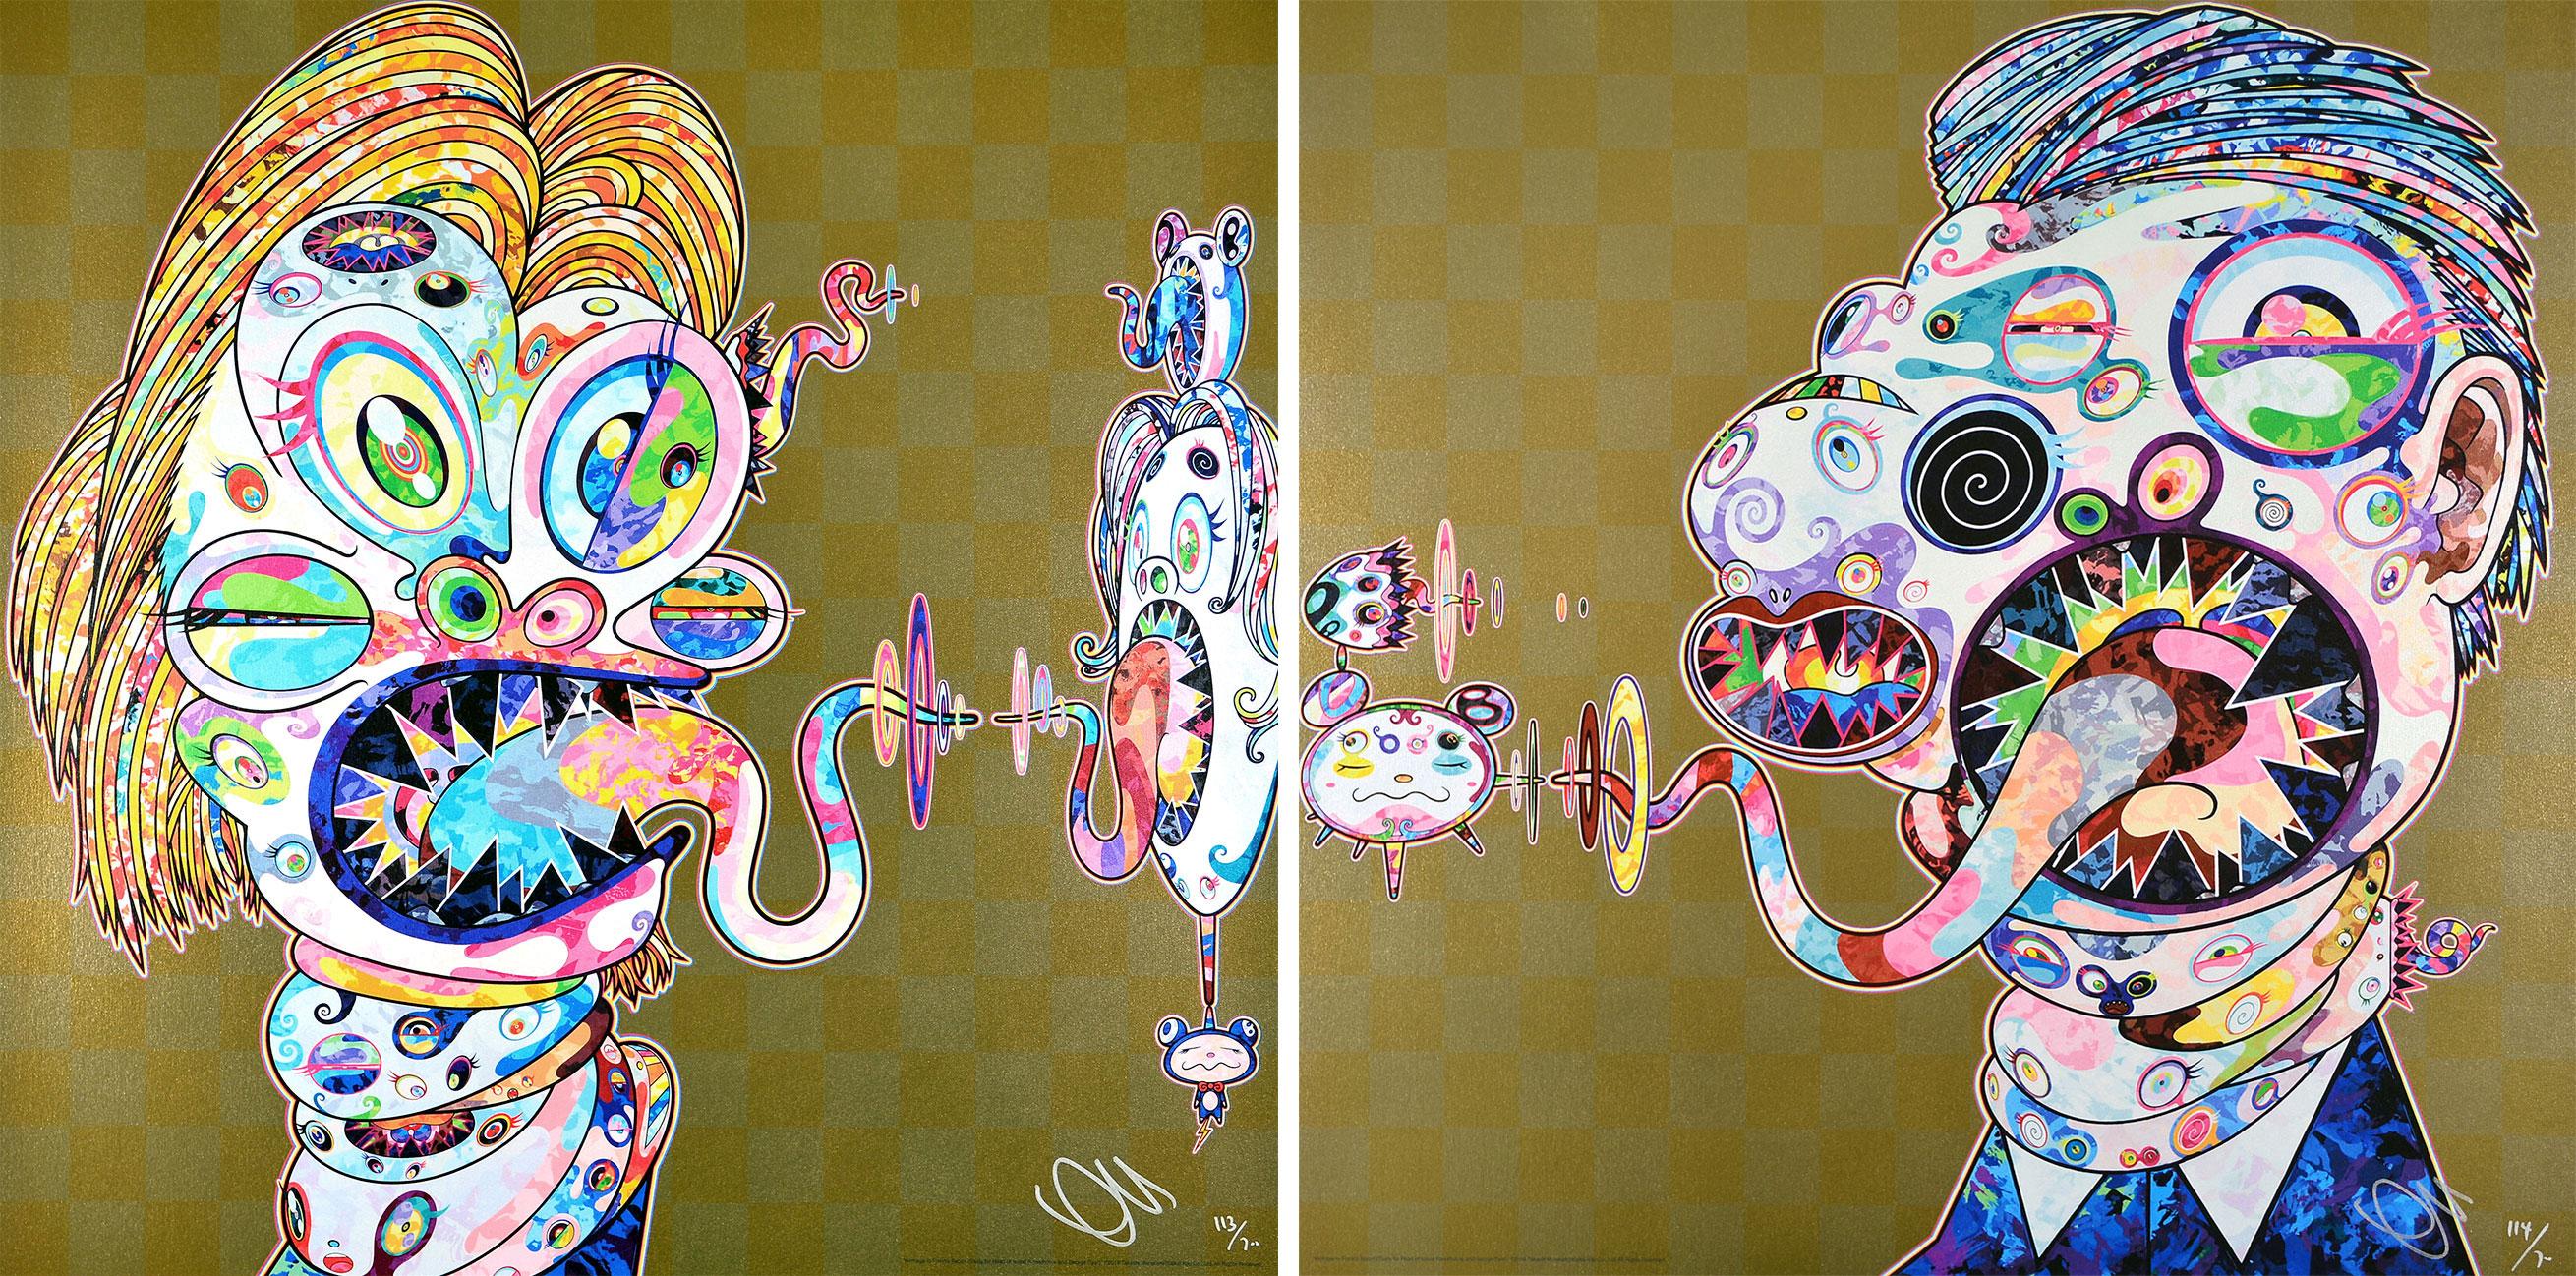 HOMAGE TO FRANCIS BACON DIPTYCH Superflat, Pop Art, Gold, Colors, Japanese